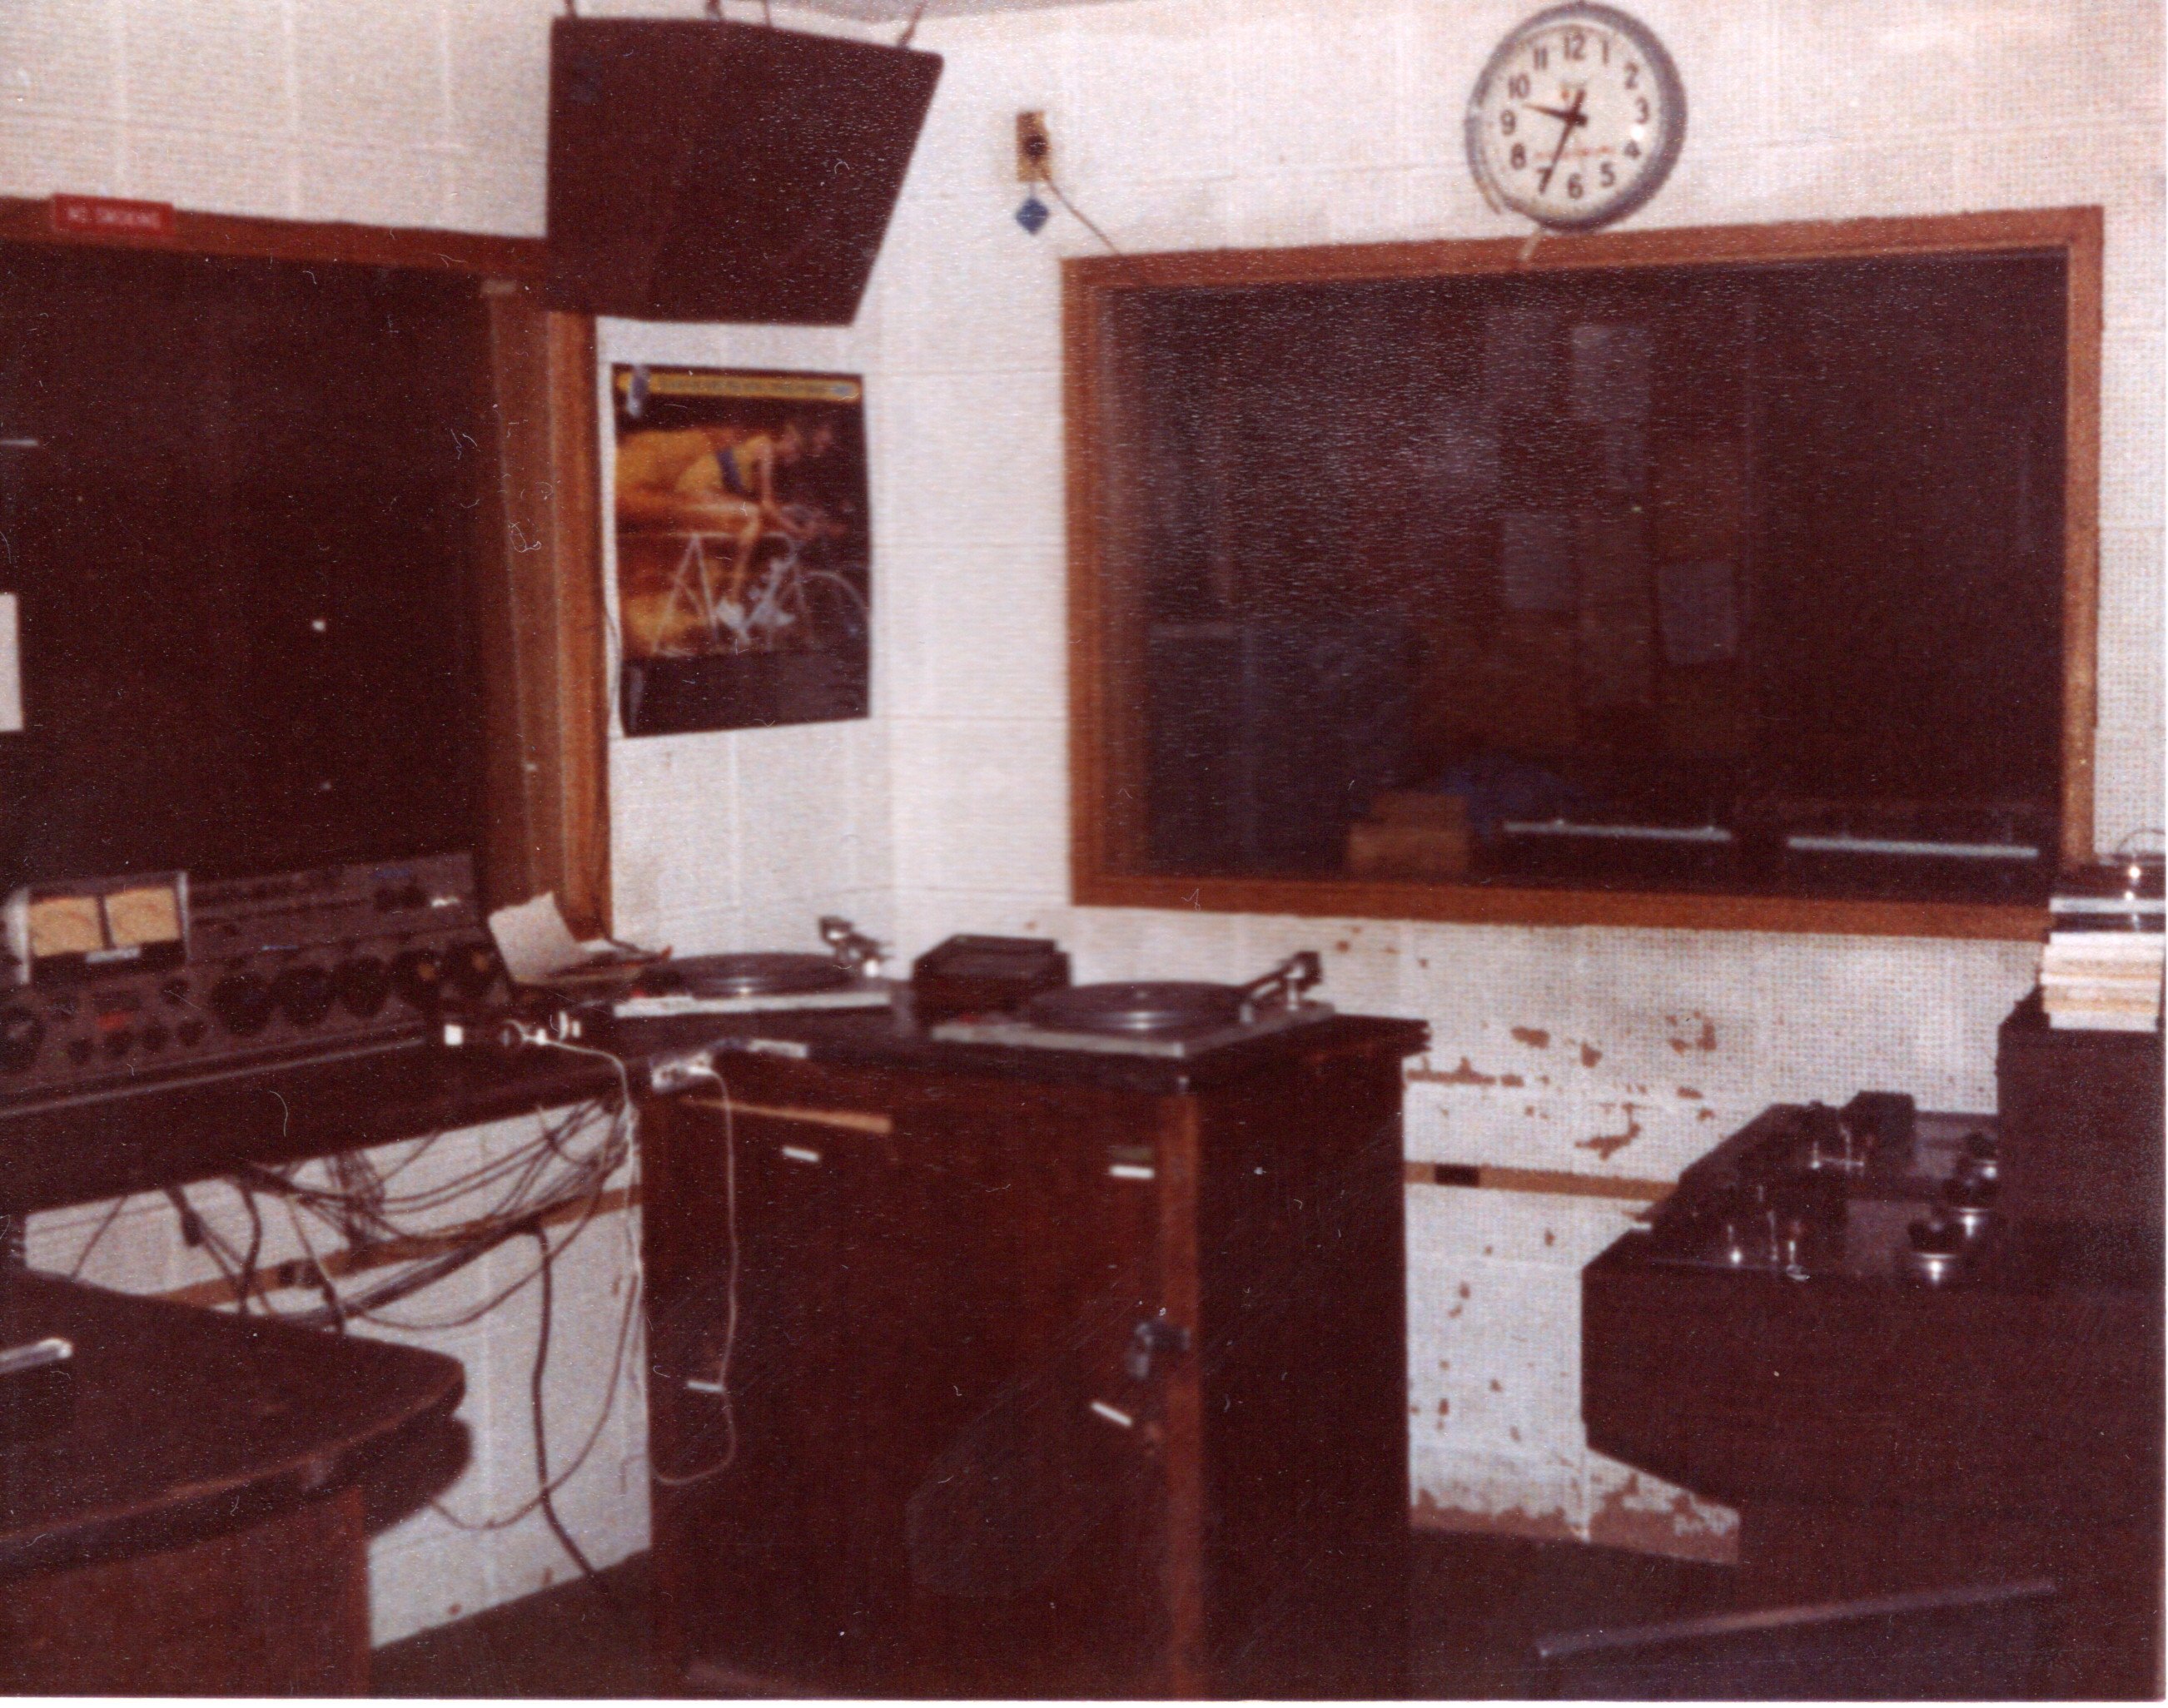 1985-Production Rebuild - Before Images